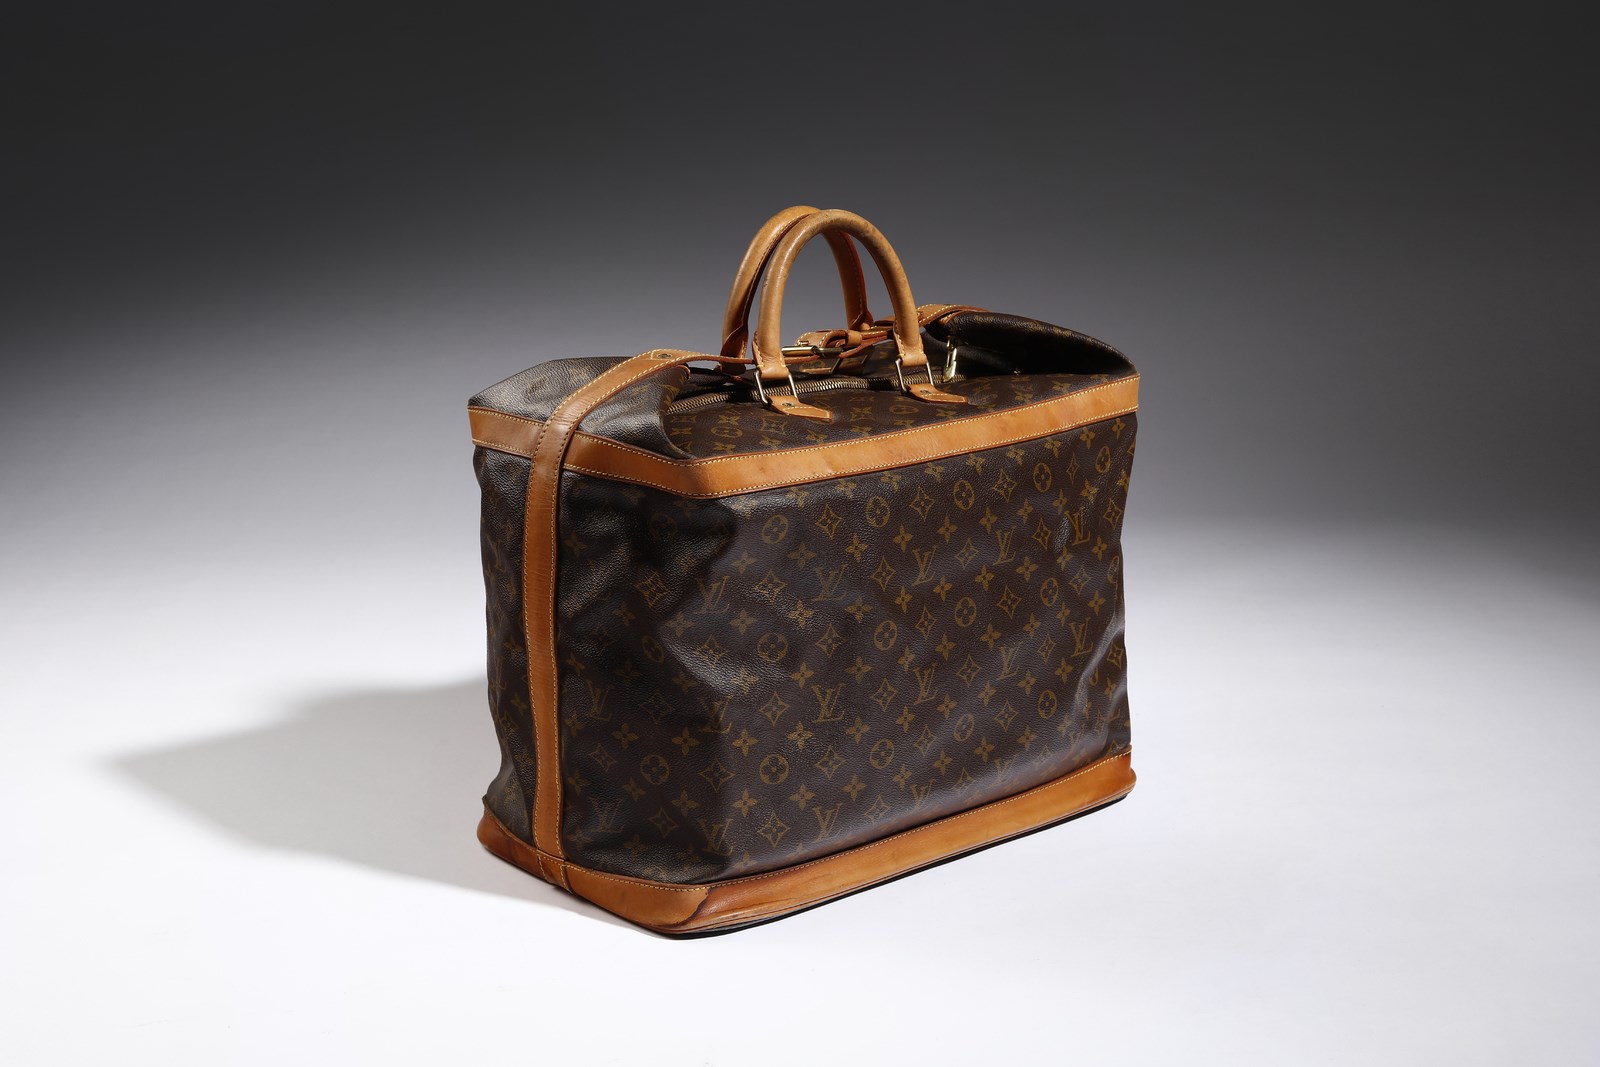 Louis Vuitton Cruiser Monogram Canvas And Leather Weekend Bag.